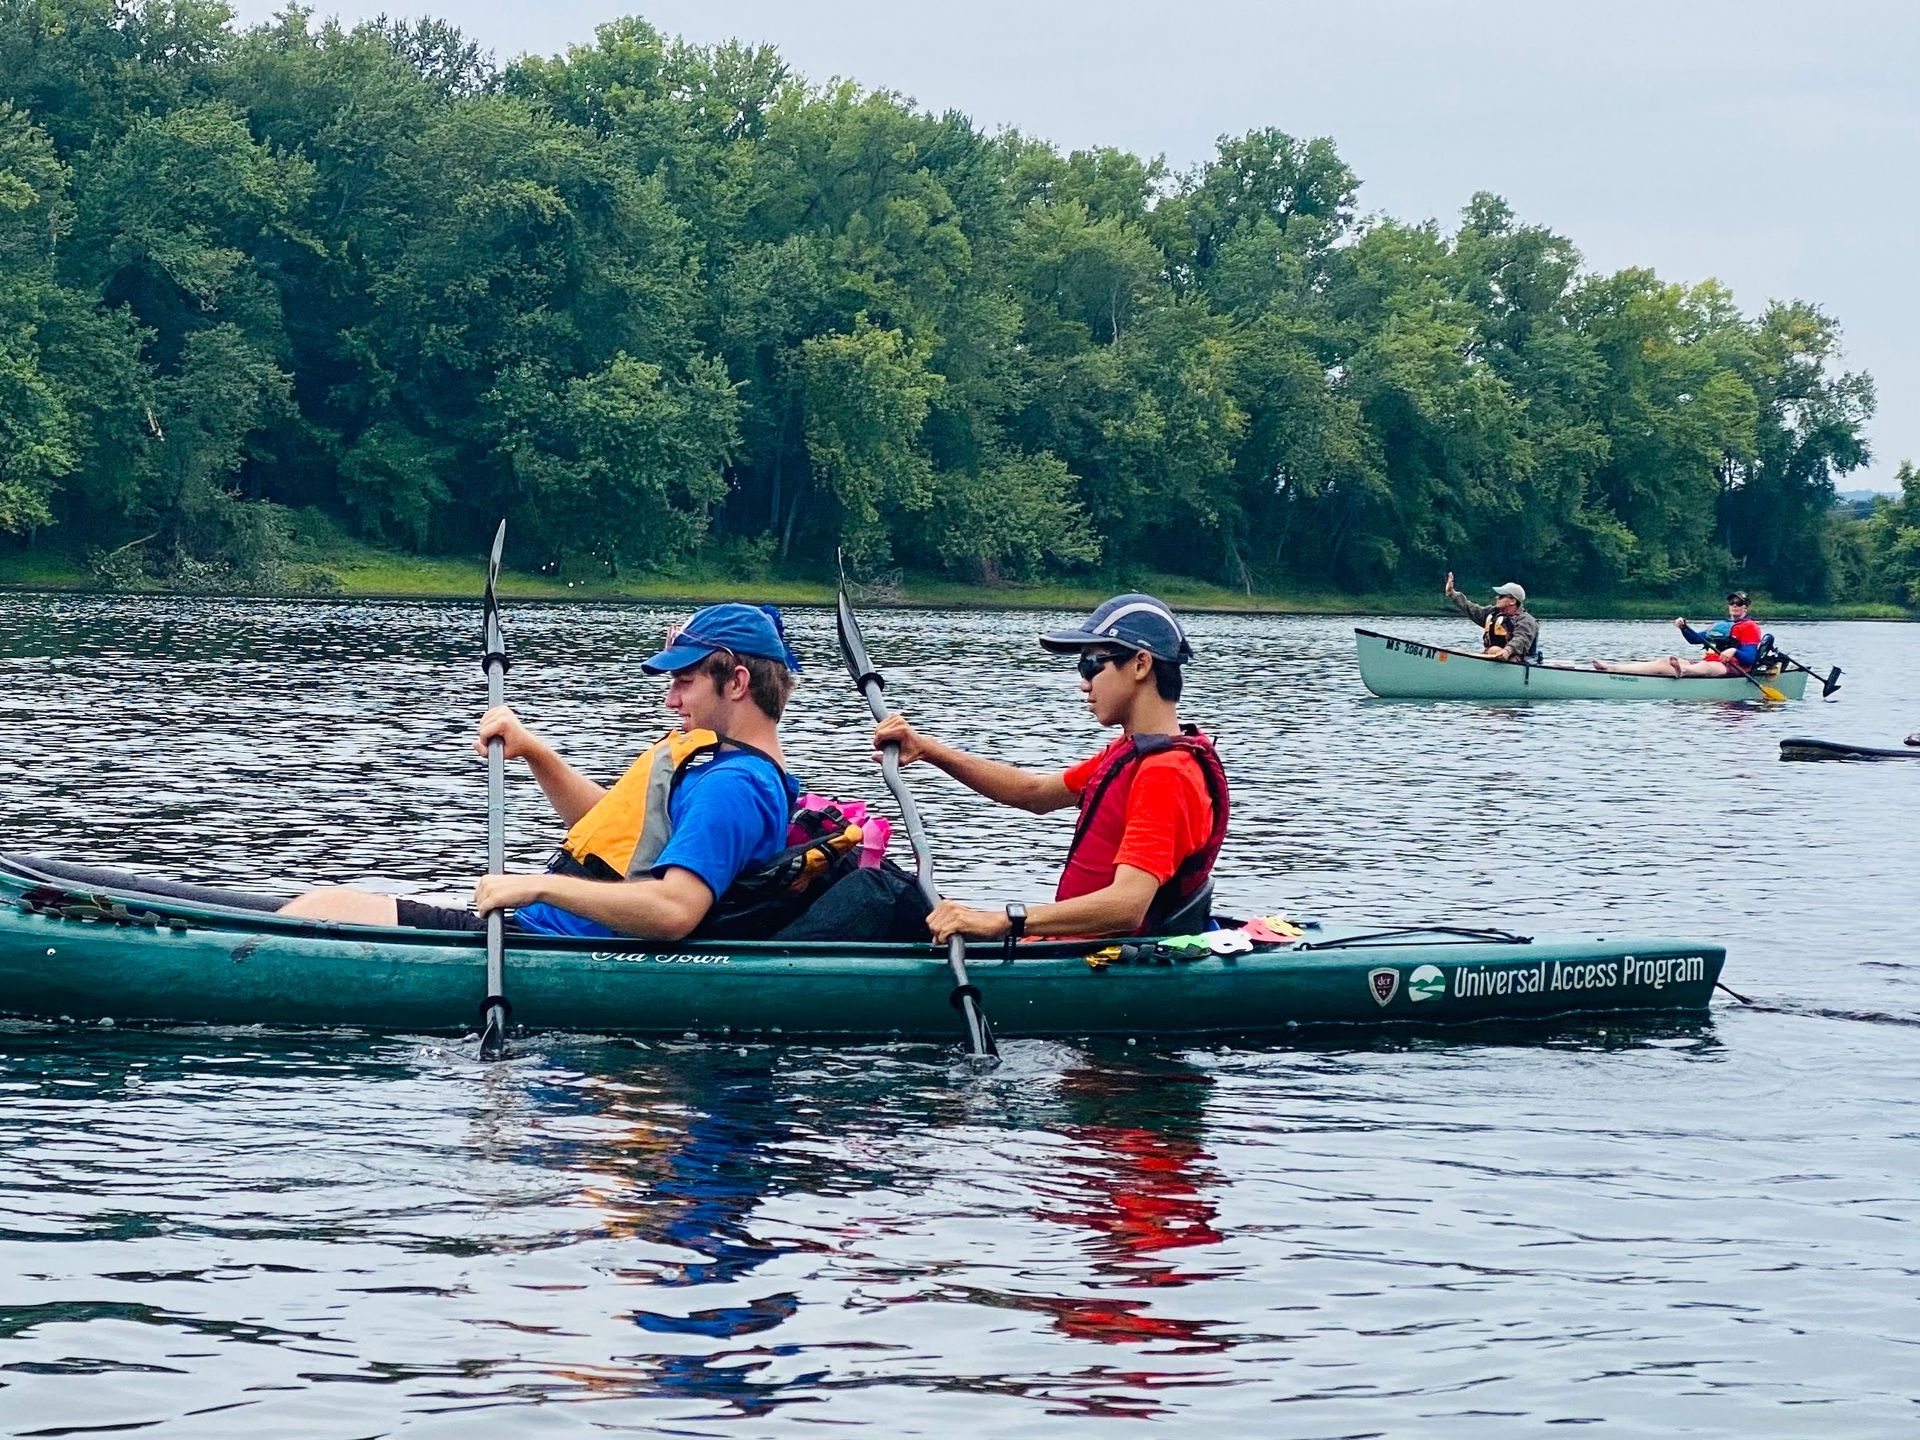 2 people in the foreground paddle in a green tandem kayak; a canoe is behind them